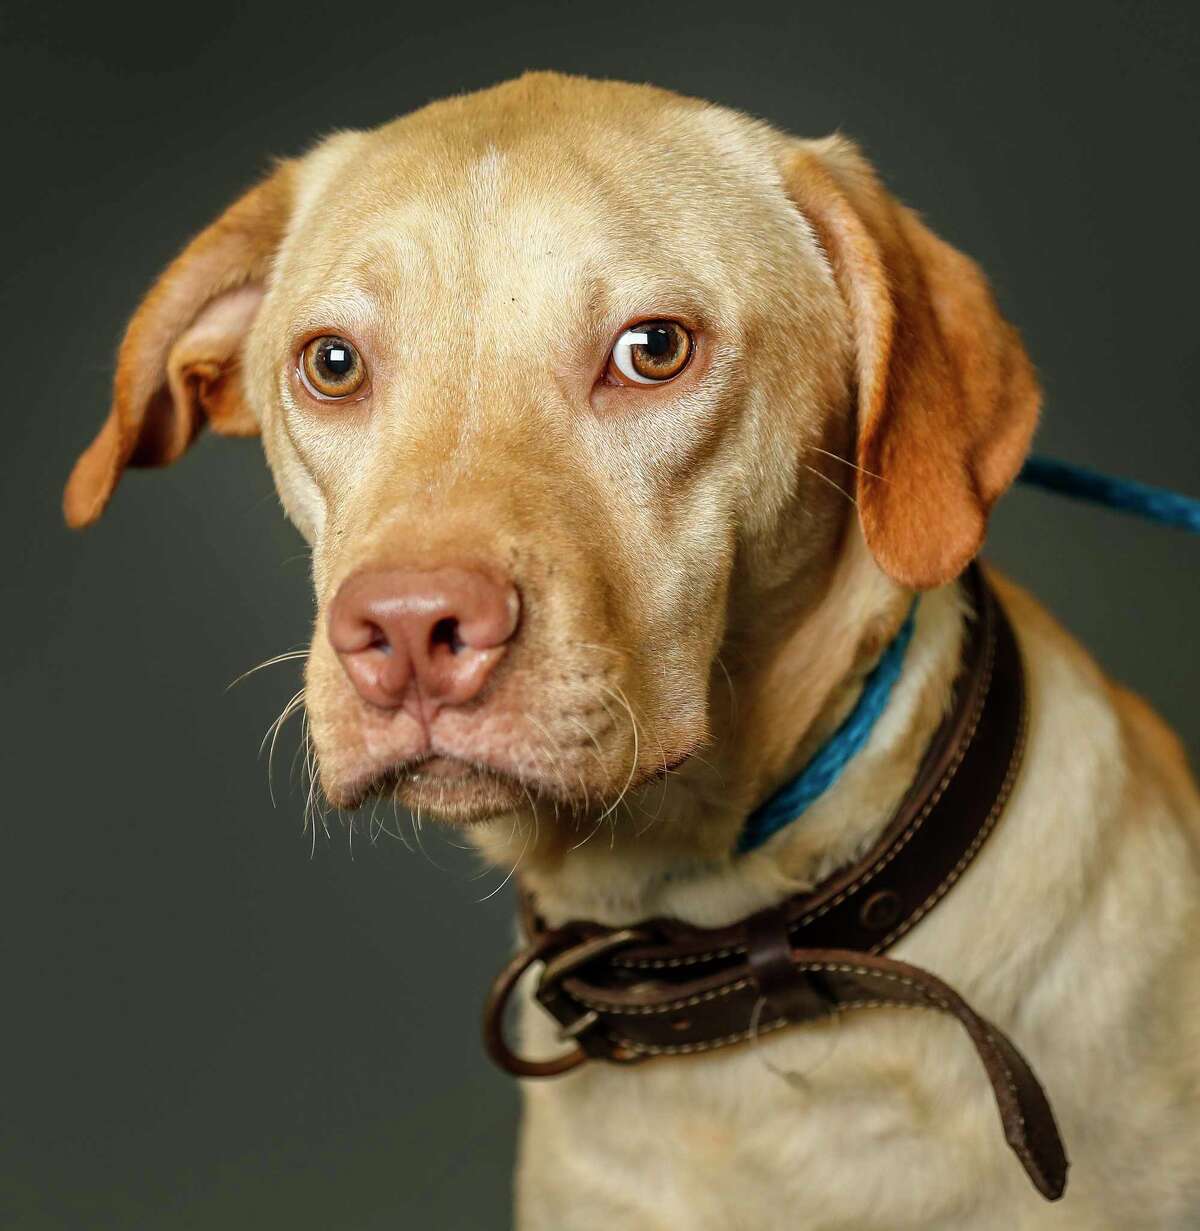 Moses is a 1-year-old, male, Labrador Retriever mix available for adoption at the Harris County Animal Shelter, in Houston. (Animal ID: A534497) Photographed Tuesday June 4, 2019. Moses is petrified of being in the shelter. He is a calm and quiet dog, who needs a loving home.